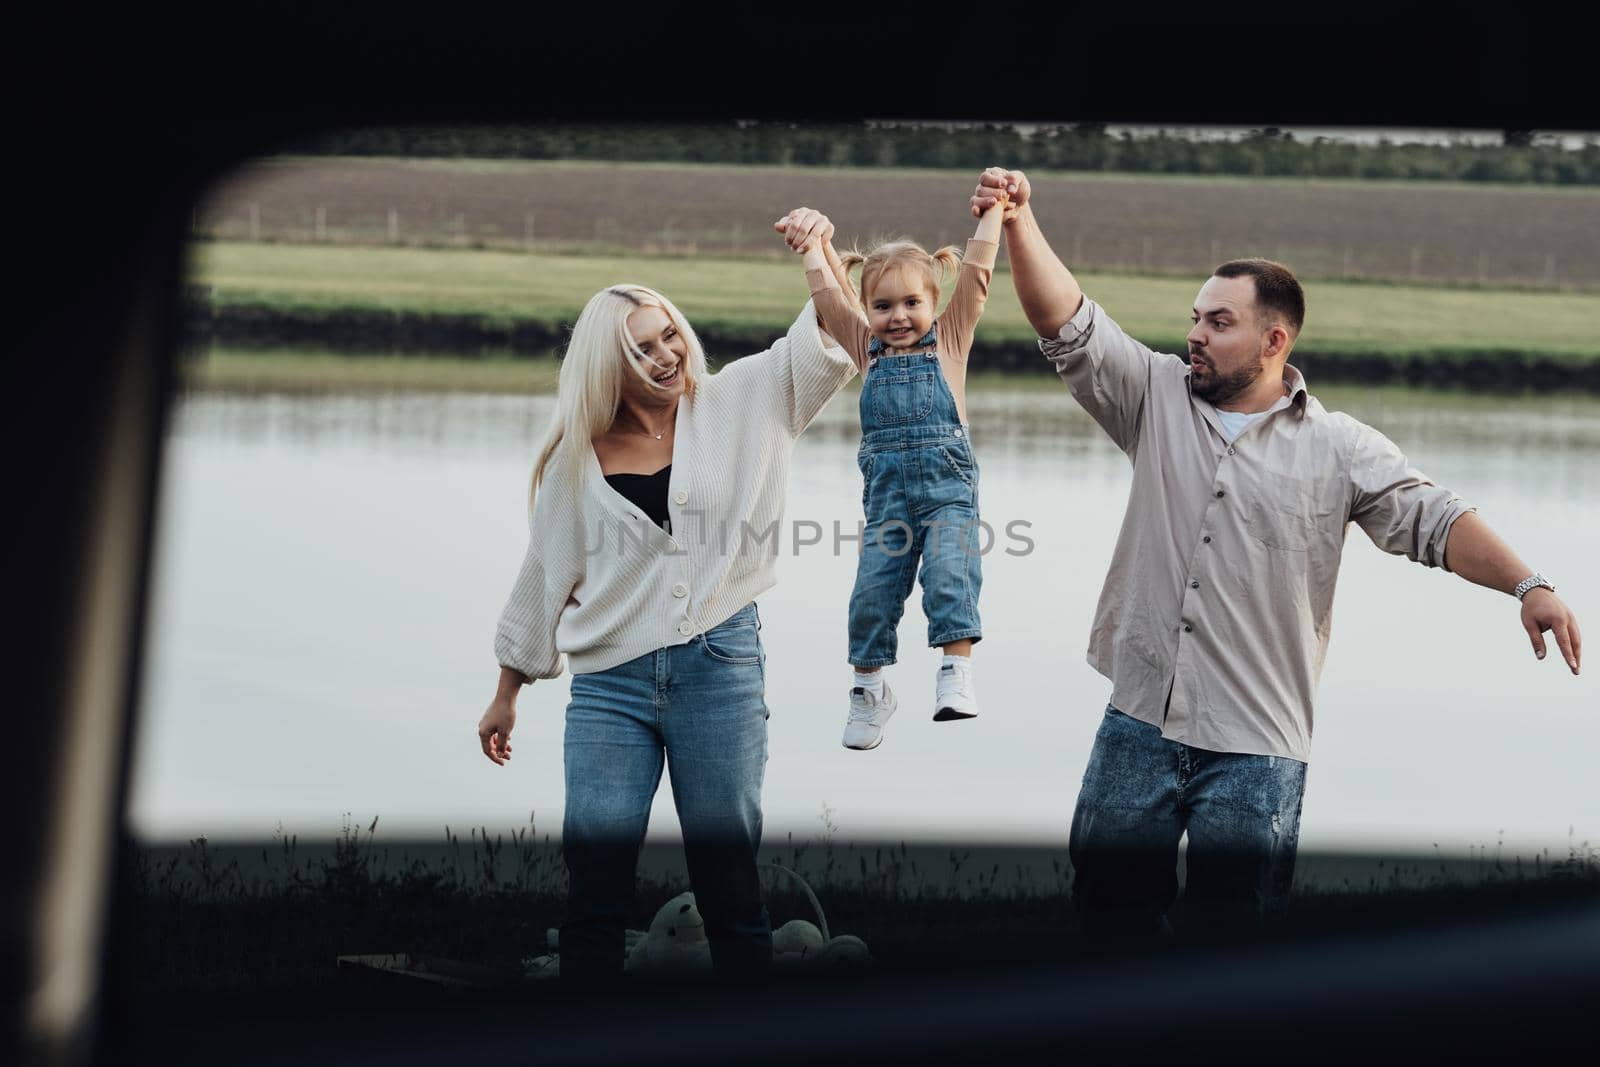 Happy Young Family Having Fun Outdoors, Mom and Dad Taking Up Their Little Daughter by Hands, View Through Window Inside of Car